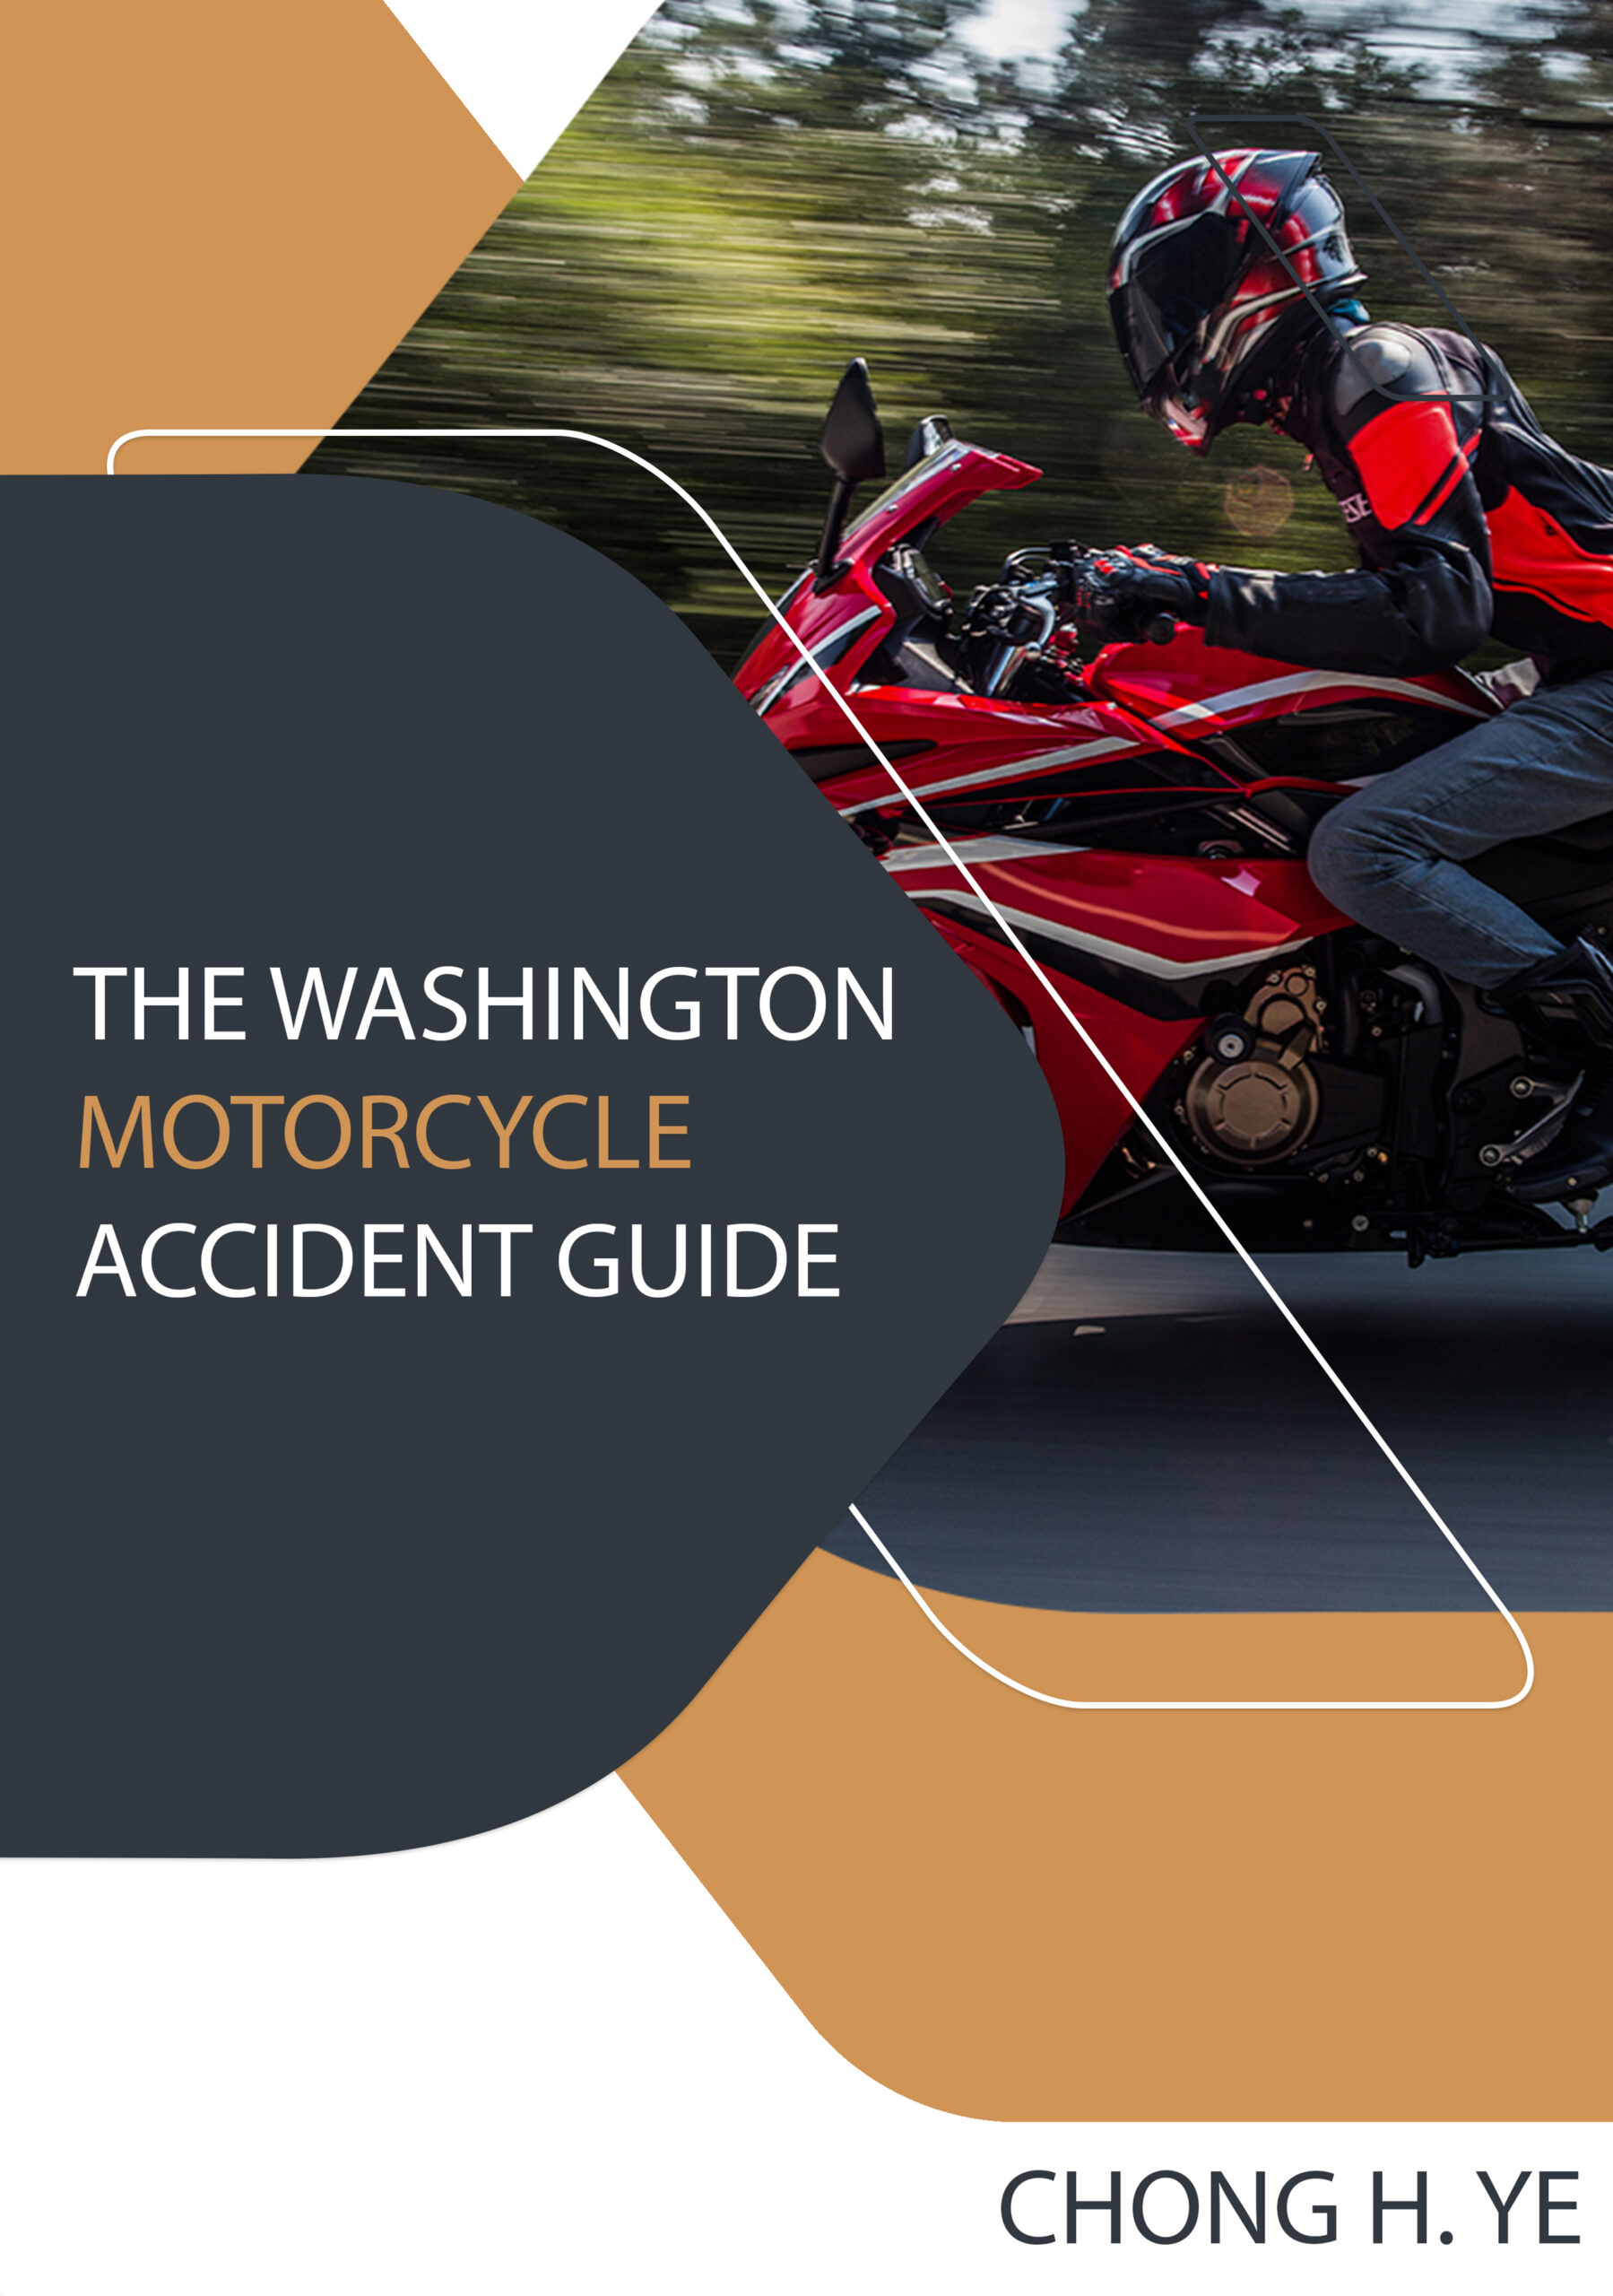 The Washington Motorcycle Accident Guide